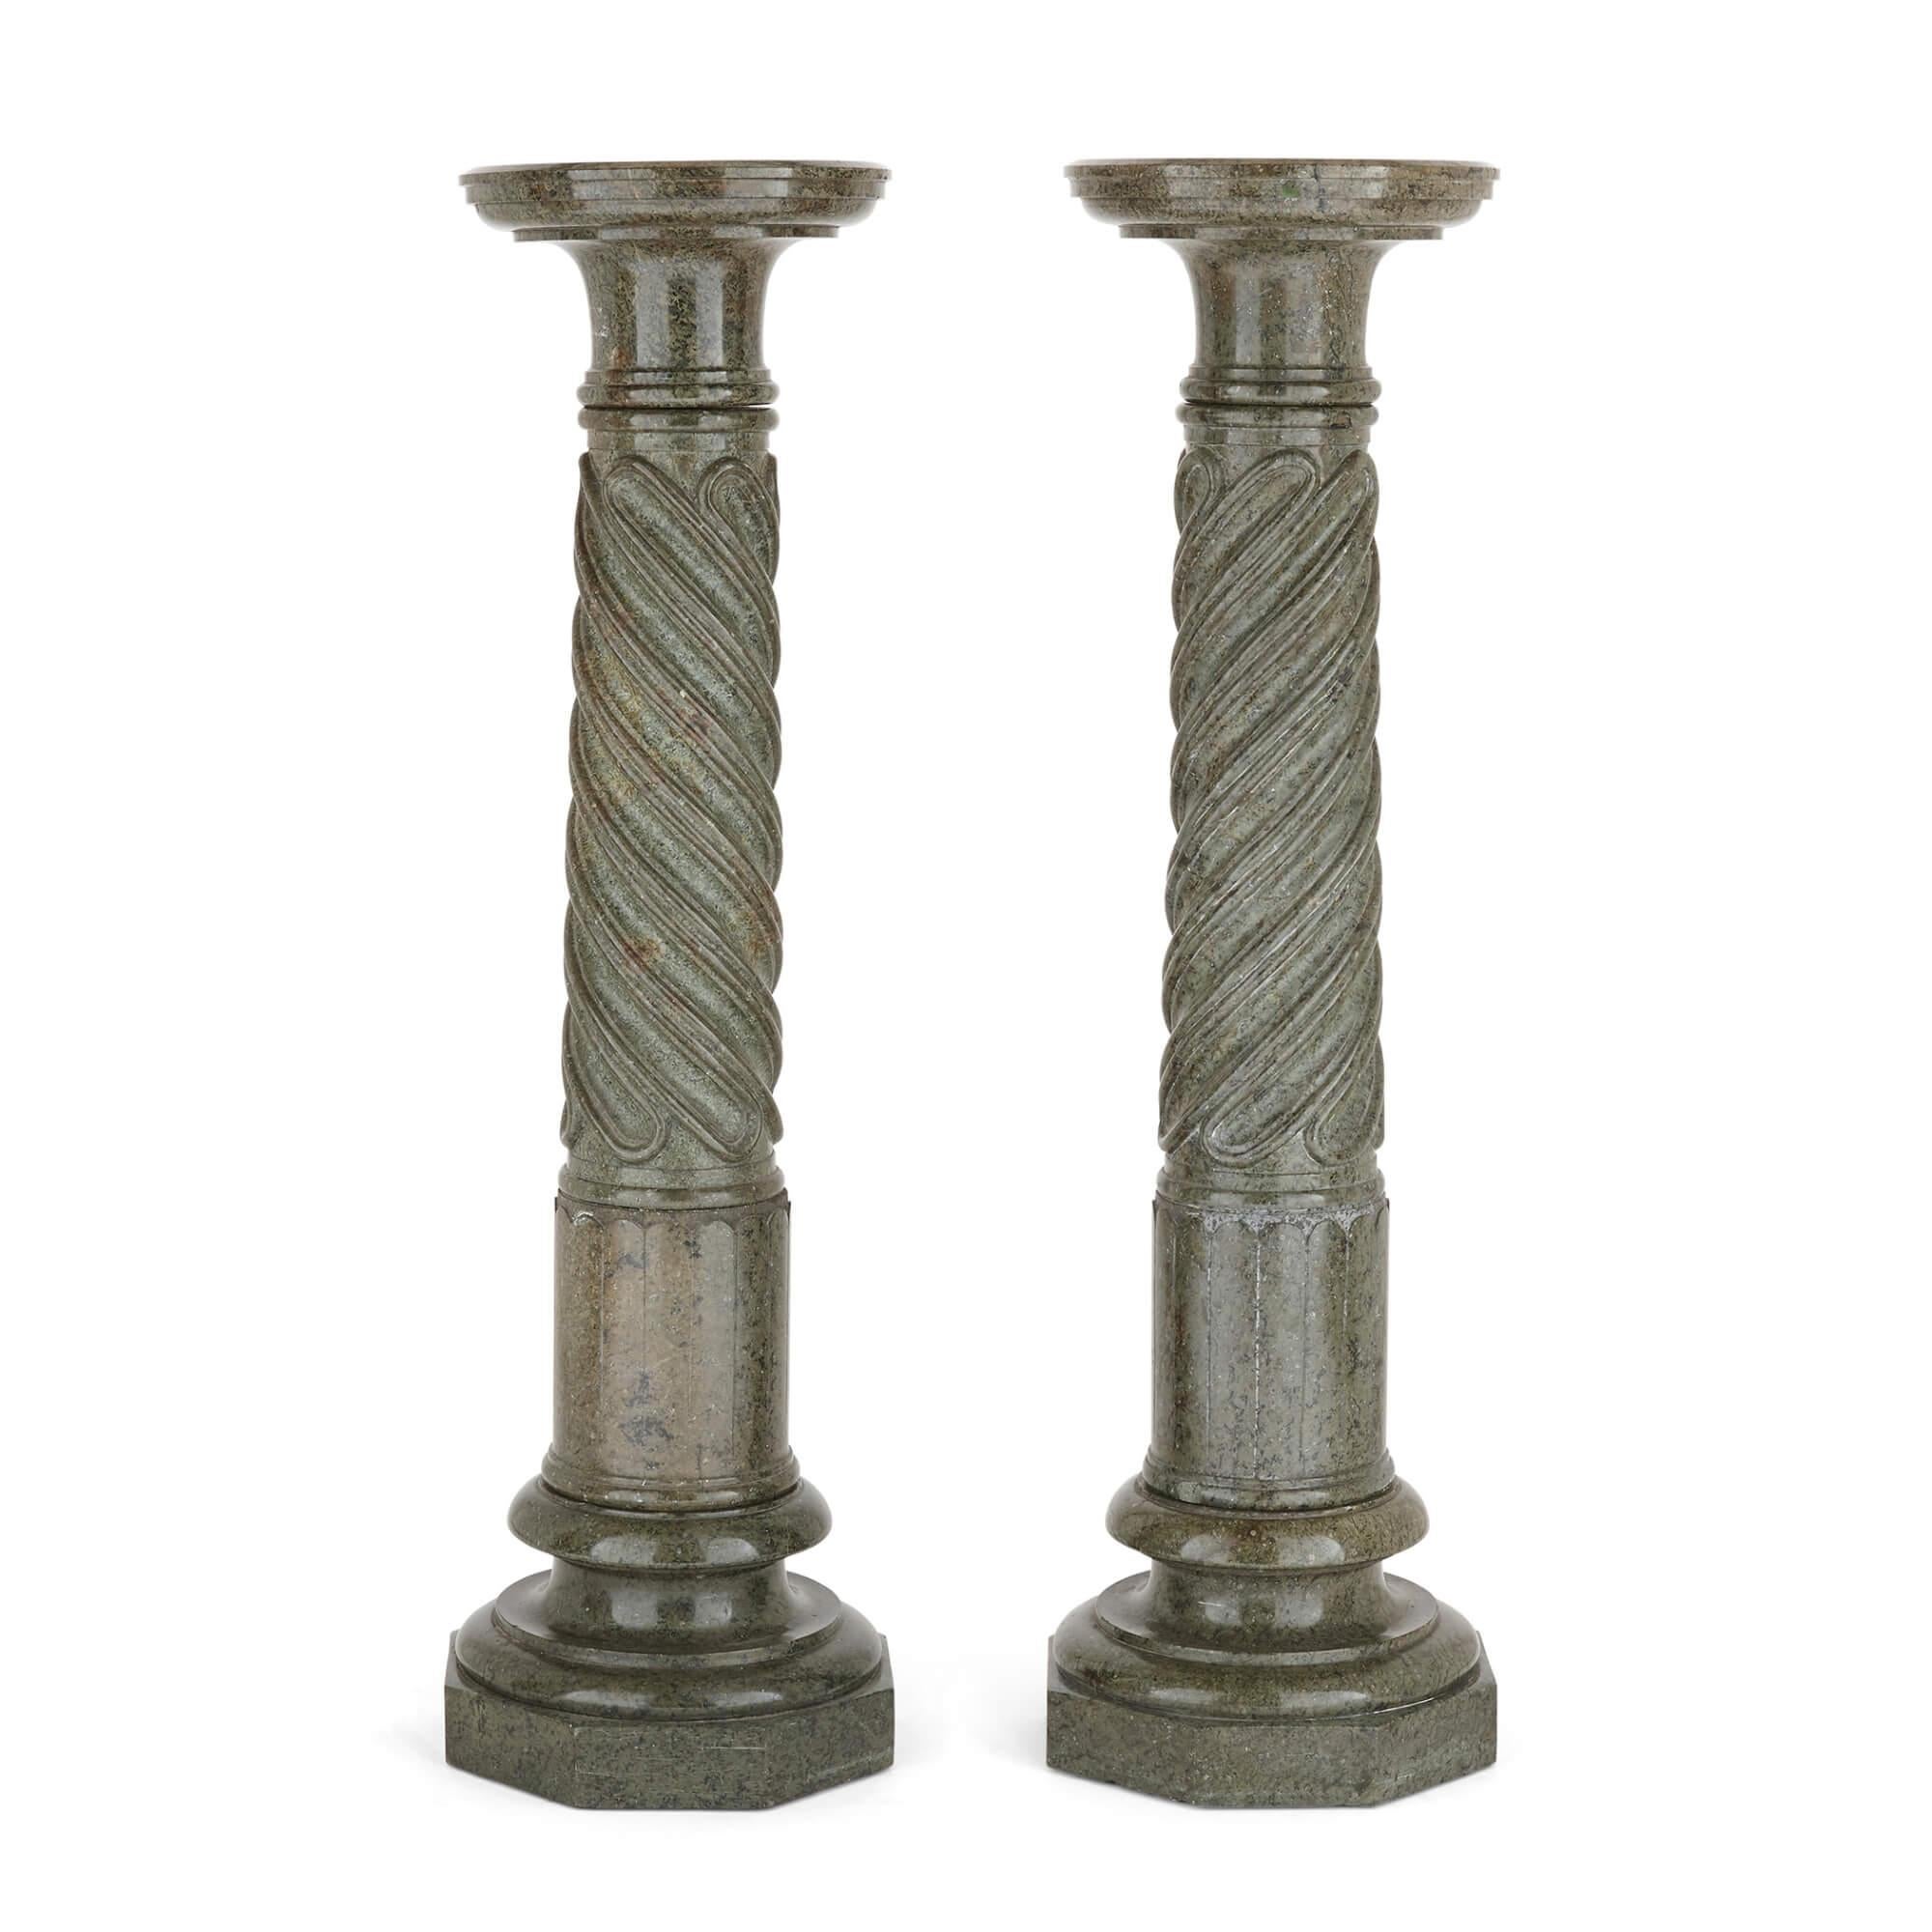 Pair of antique French marble column pedestals
French, 19th Century
Height 107cm, diameter 30.5cm

This pair of grand, green marble pedestals sit on octagonal bases and feature twisting and fluting to the central circular column. They are each